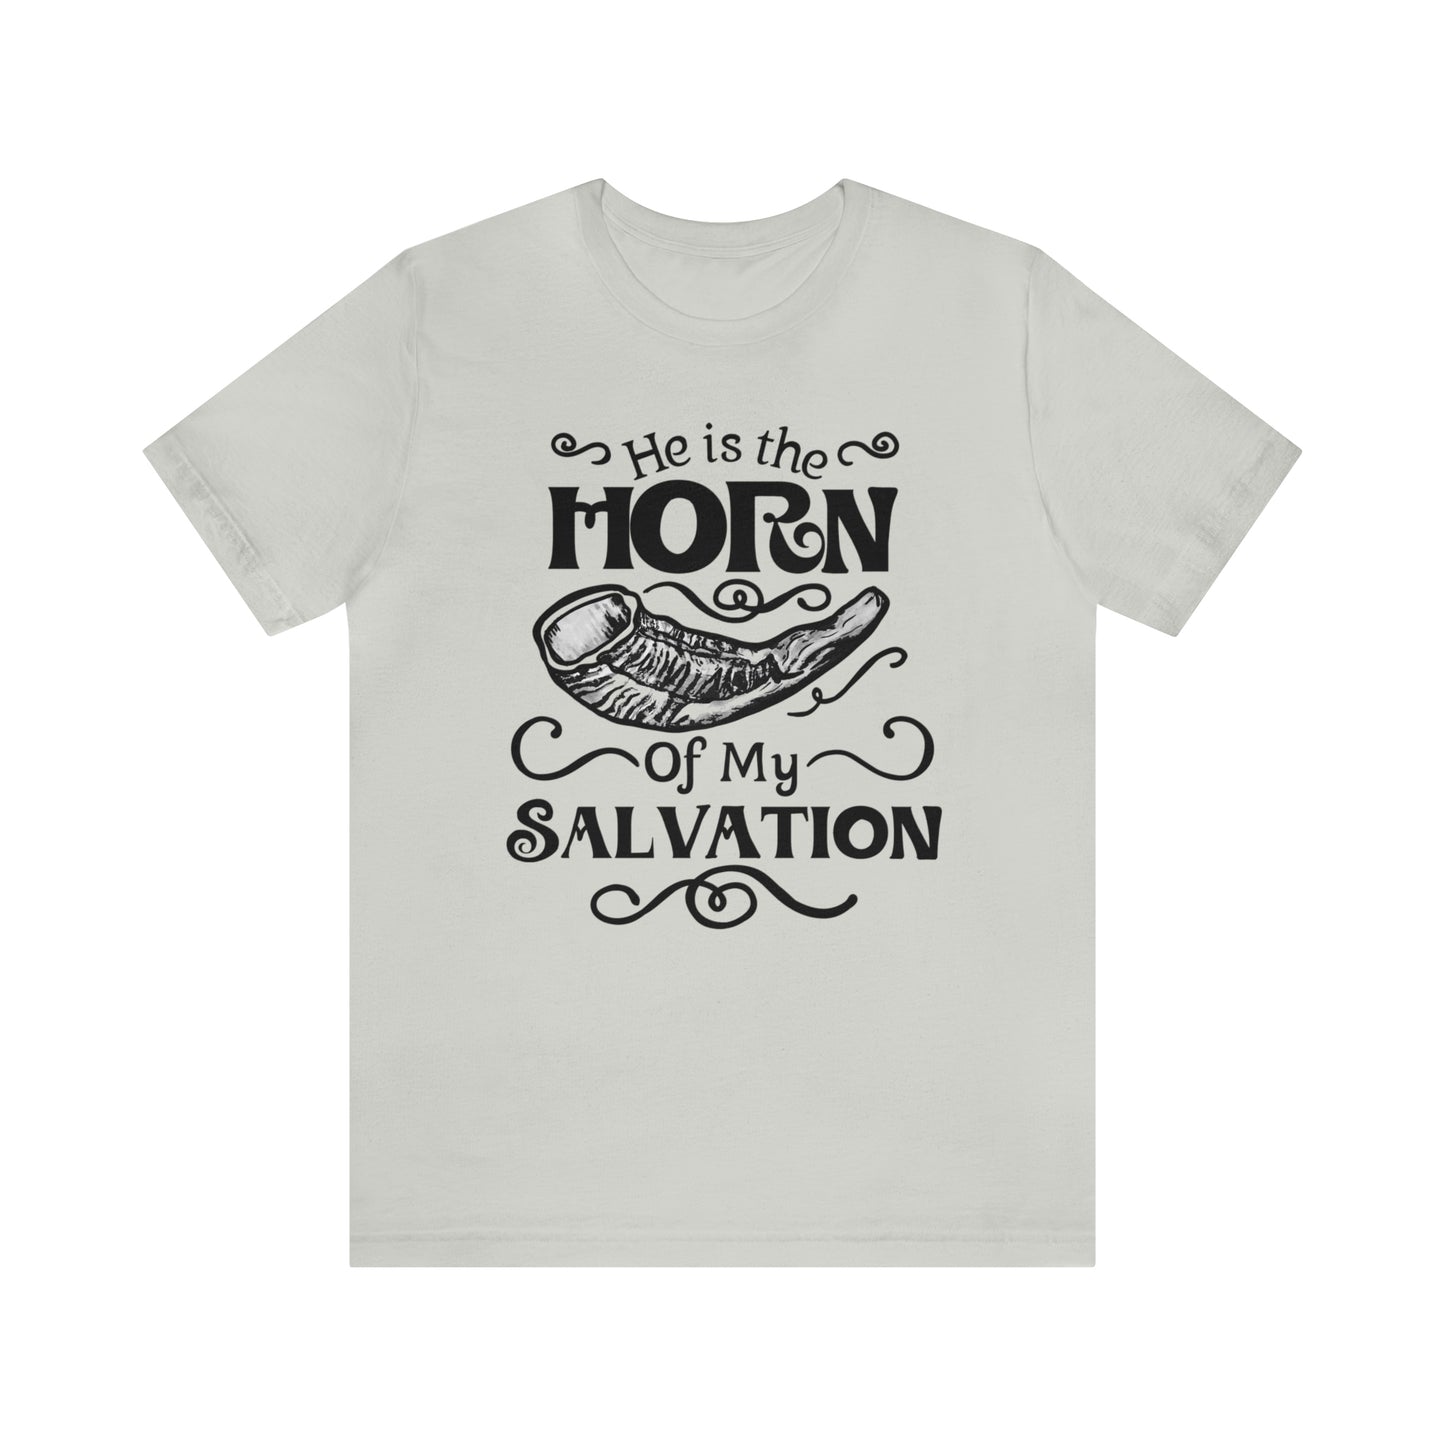 Shofar- He is the Horn of my Salvation (Green Pastures Apparel)